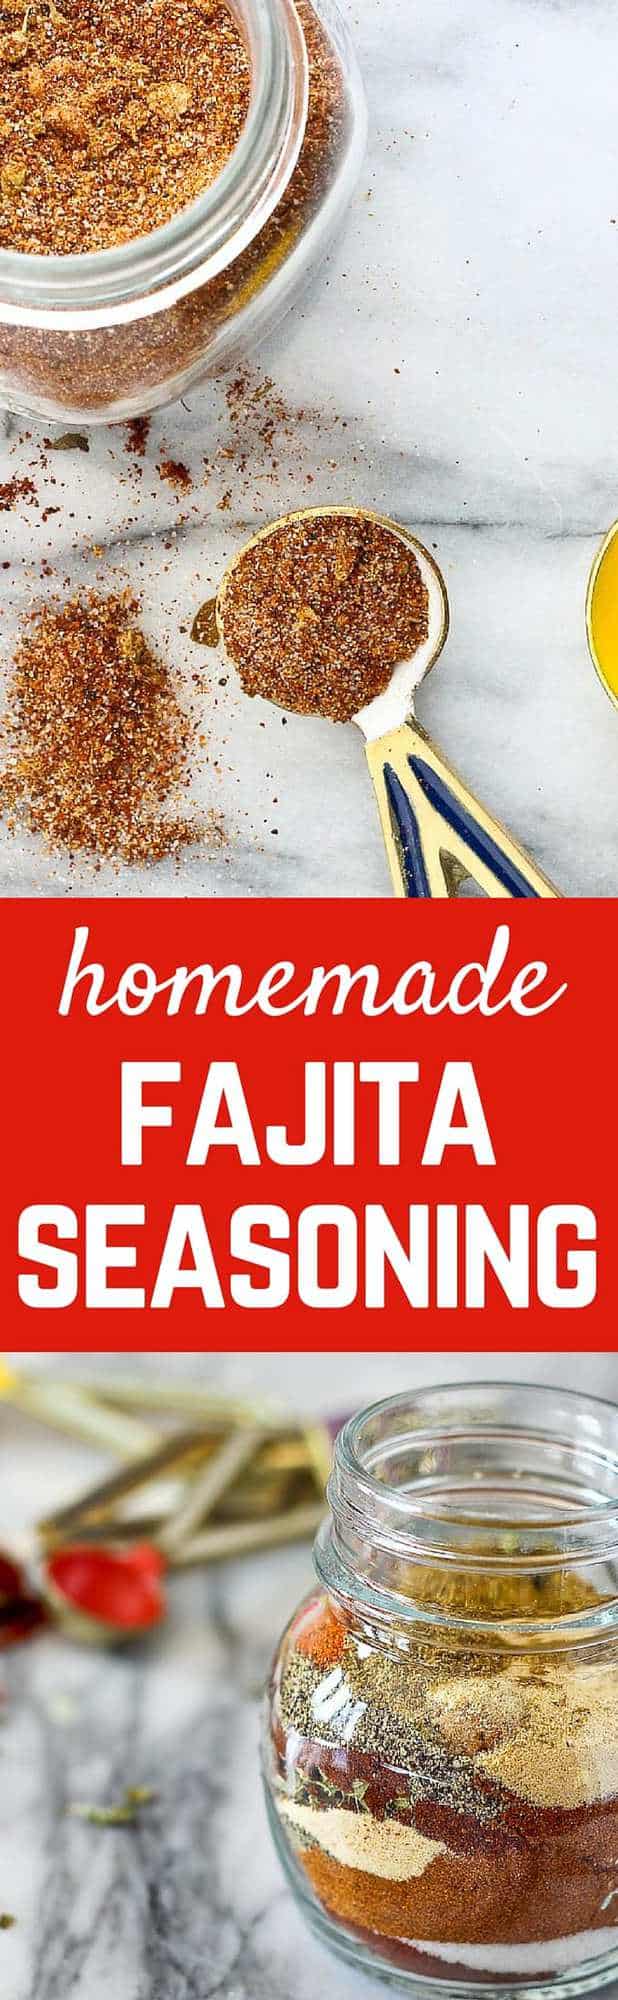 Making homemade fajita seasoning is so easy! No additives or artificial anything! Try it and you'll never go back to store bought packets. Get the EASY recipe on RachelCooks.com!